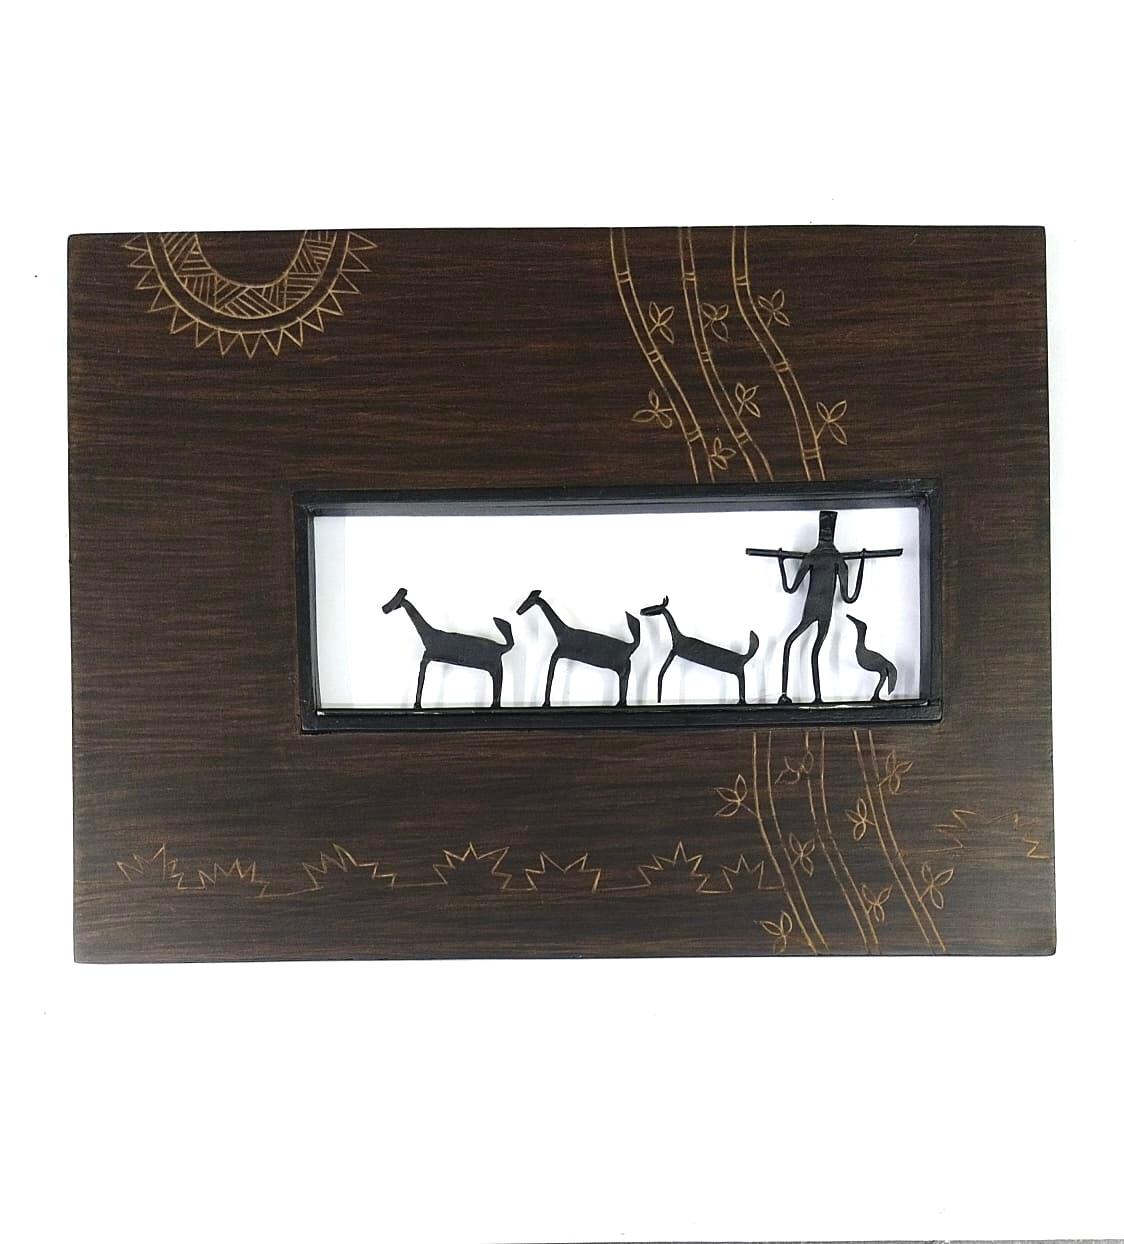 Wooden Iron Fusion Art Exclusive Engraving Handcrafted In India By Tamrapatra